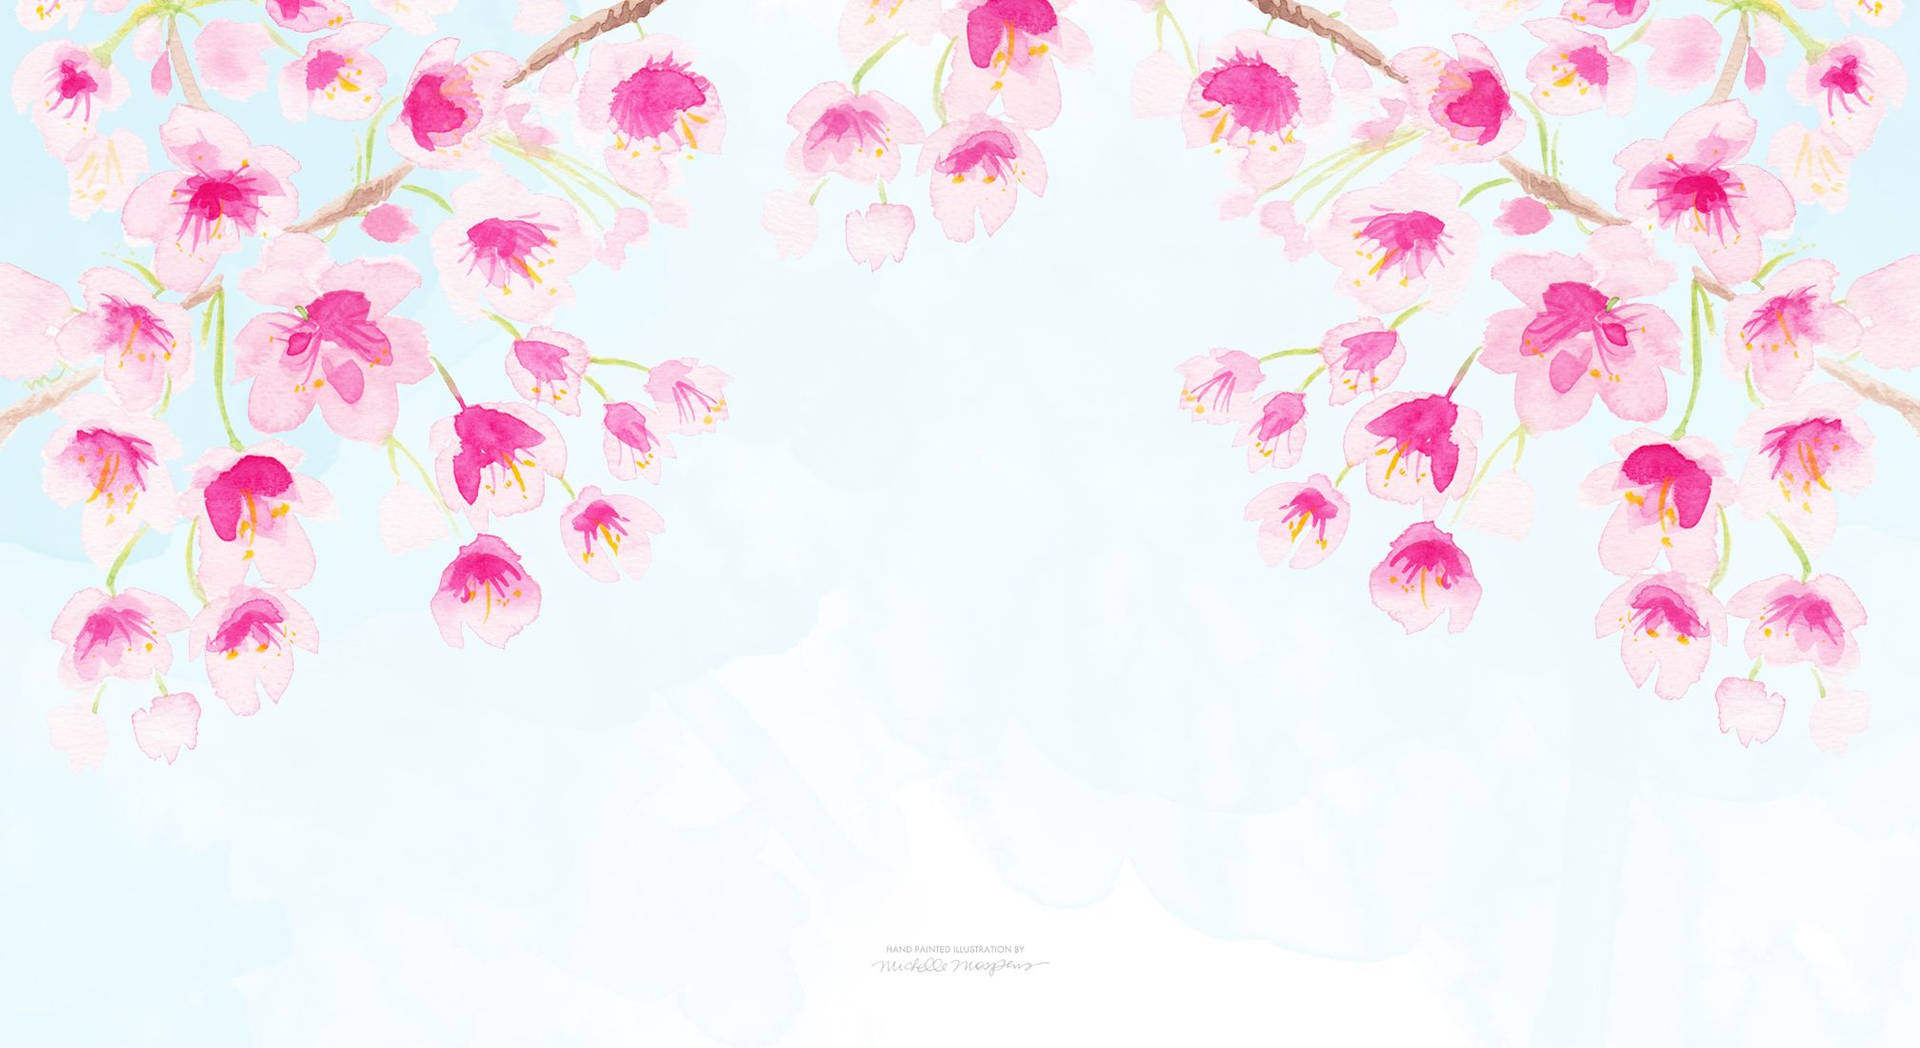 Watercolor Cherry Blossoms Background